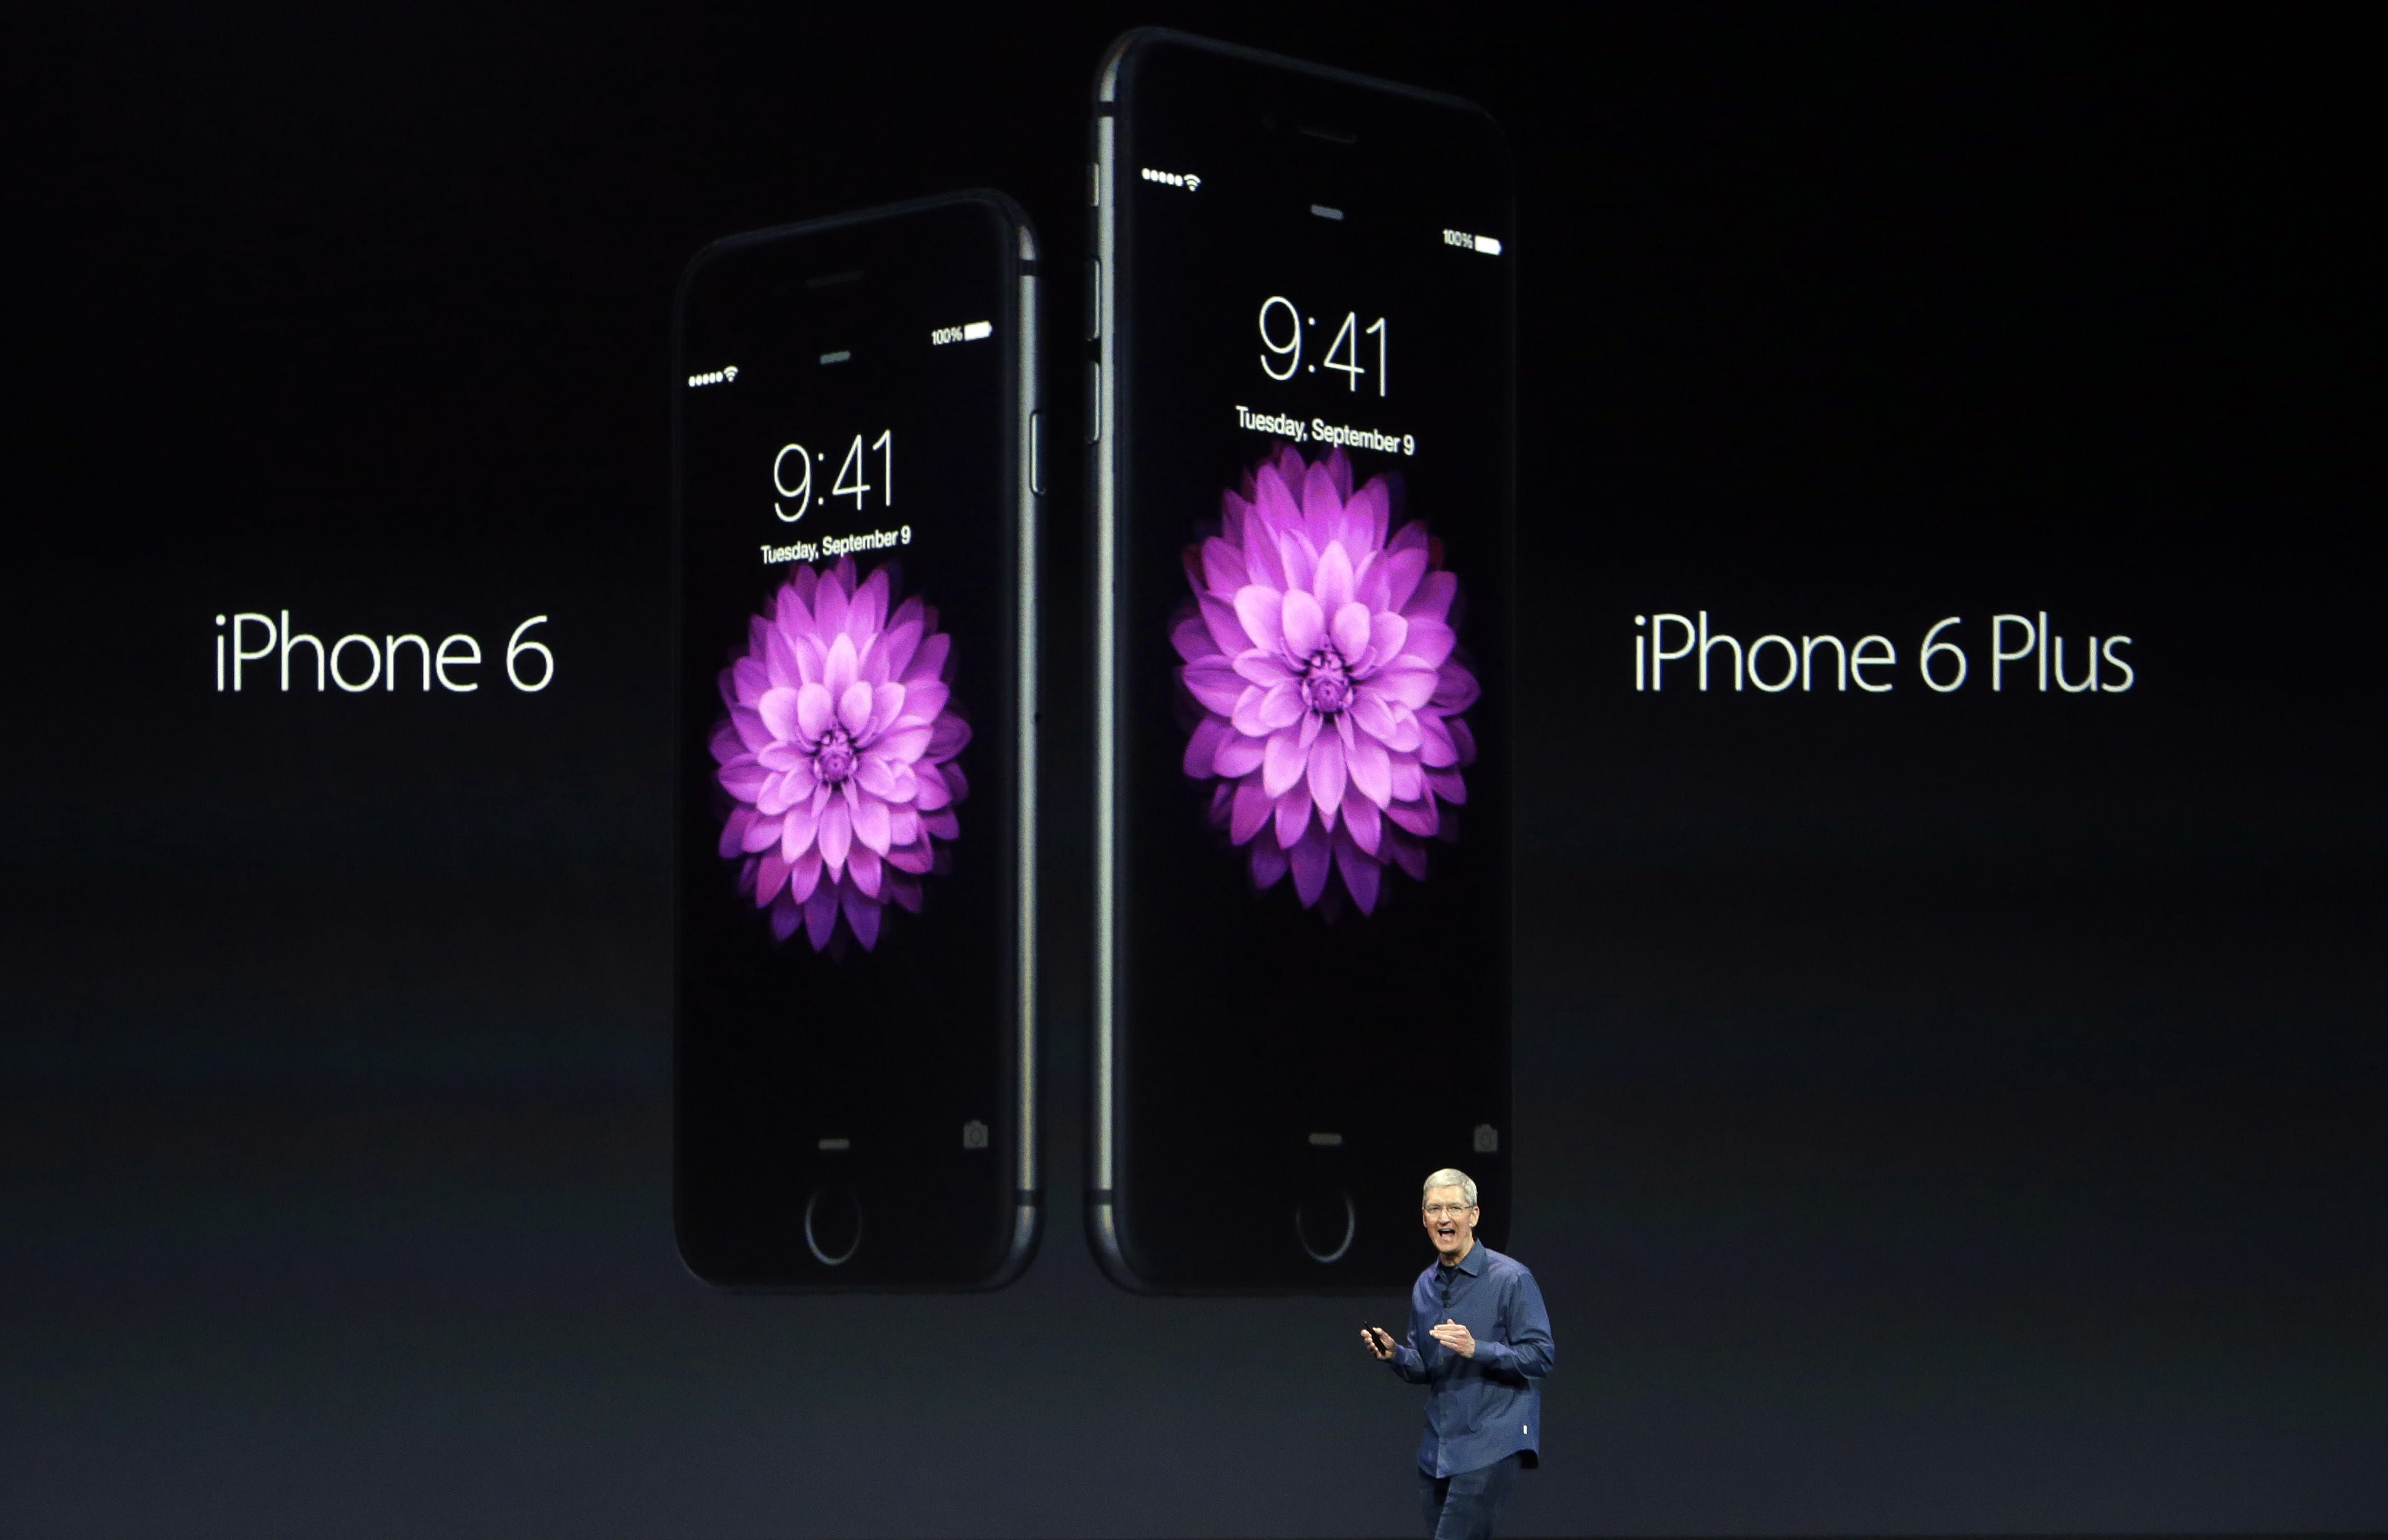 Apple CEO Tim Cook introduces the new iPhone 6 and iPhone 6 Plus on Tuesday in Cupertino, Calif.